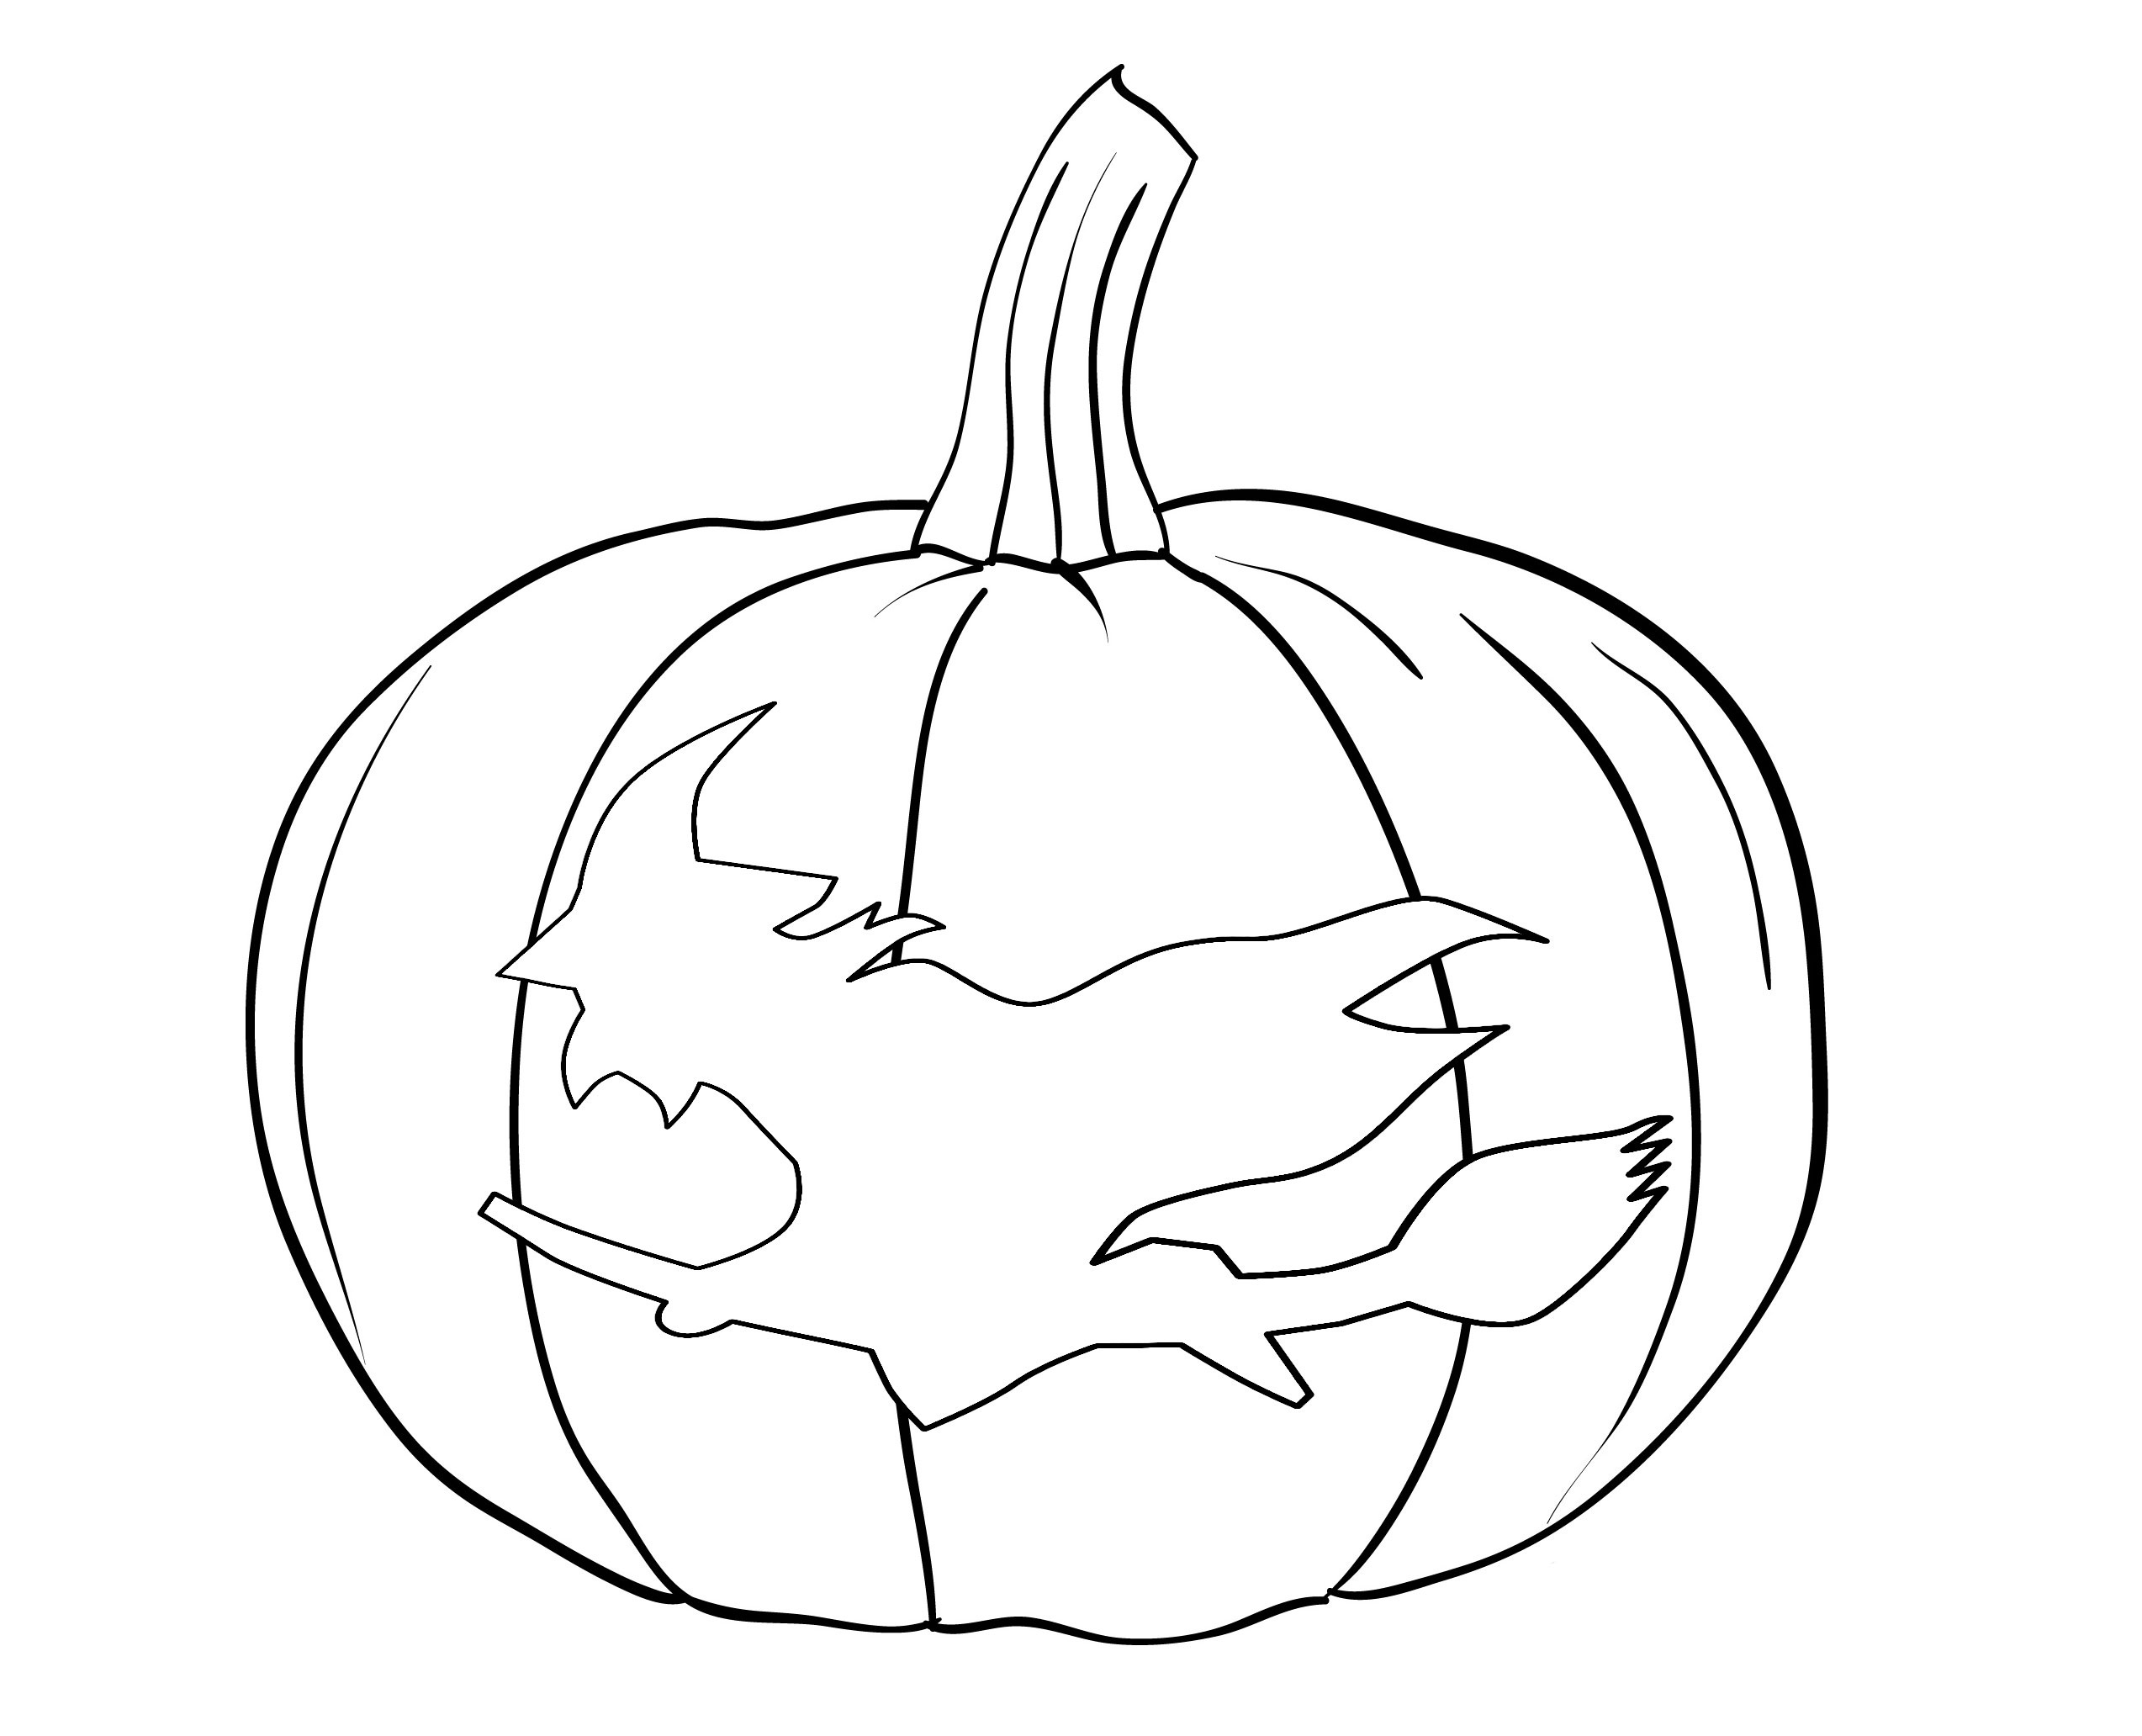 27  Printable Halloween Pumpkin Coloring Pages Background COLORIST